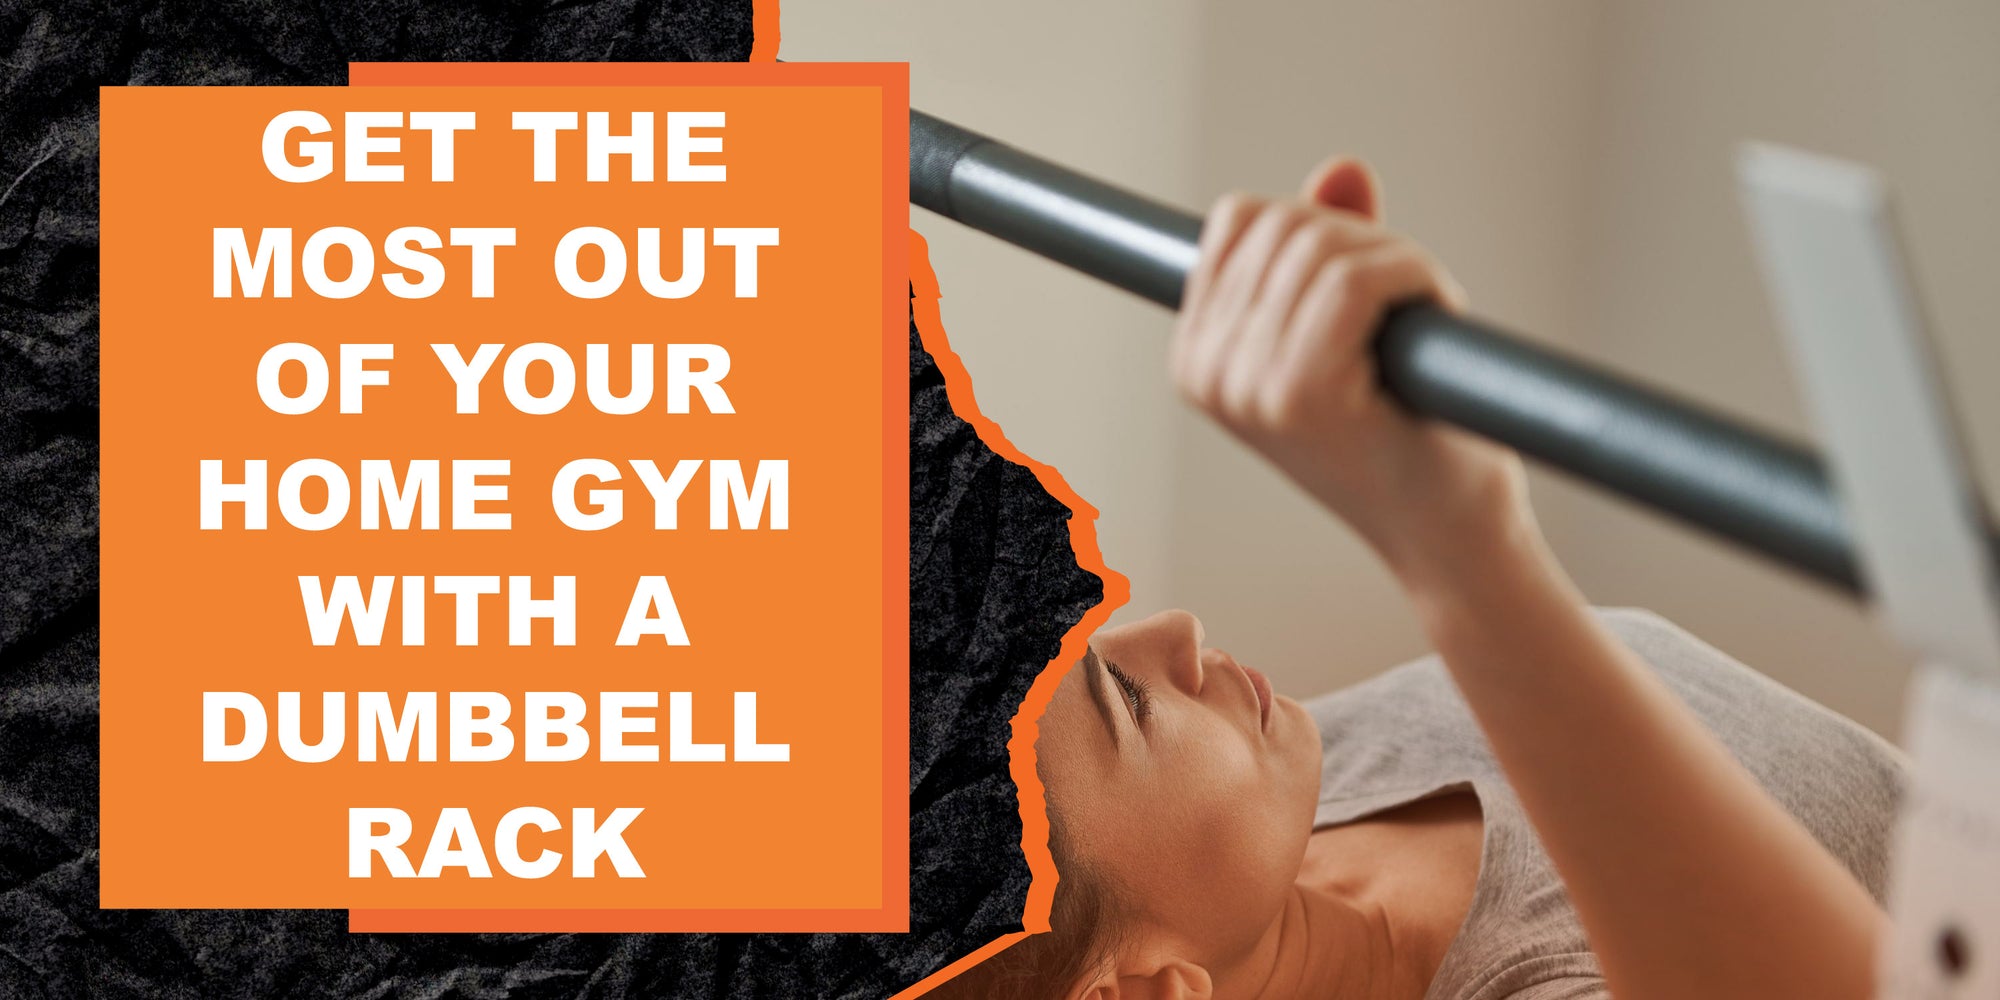 Get the Most Out of Your Home Gym with a Dumbbell Rack